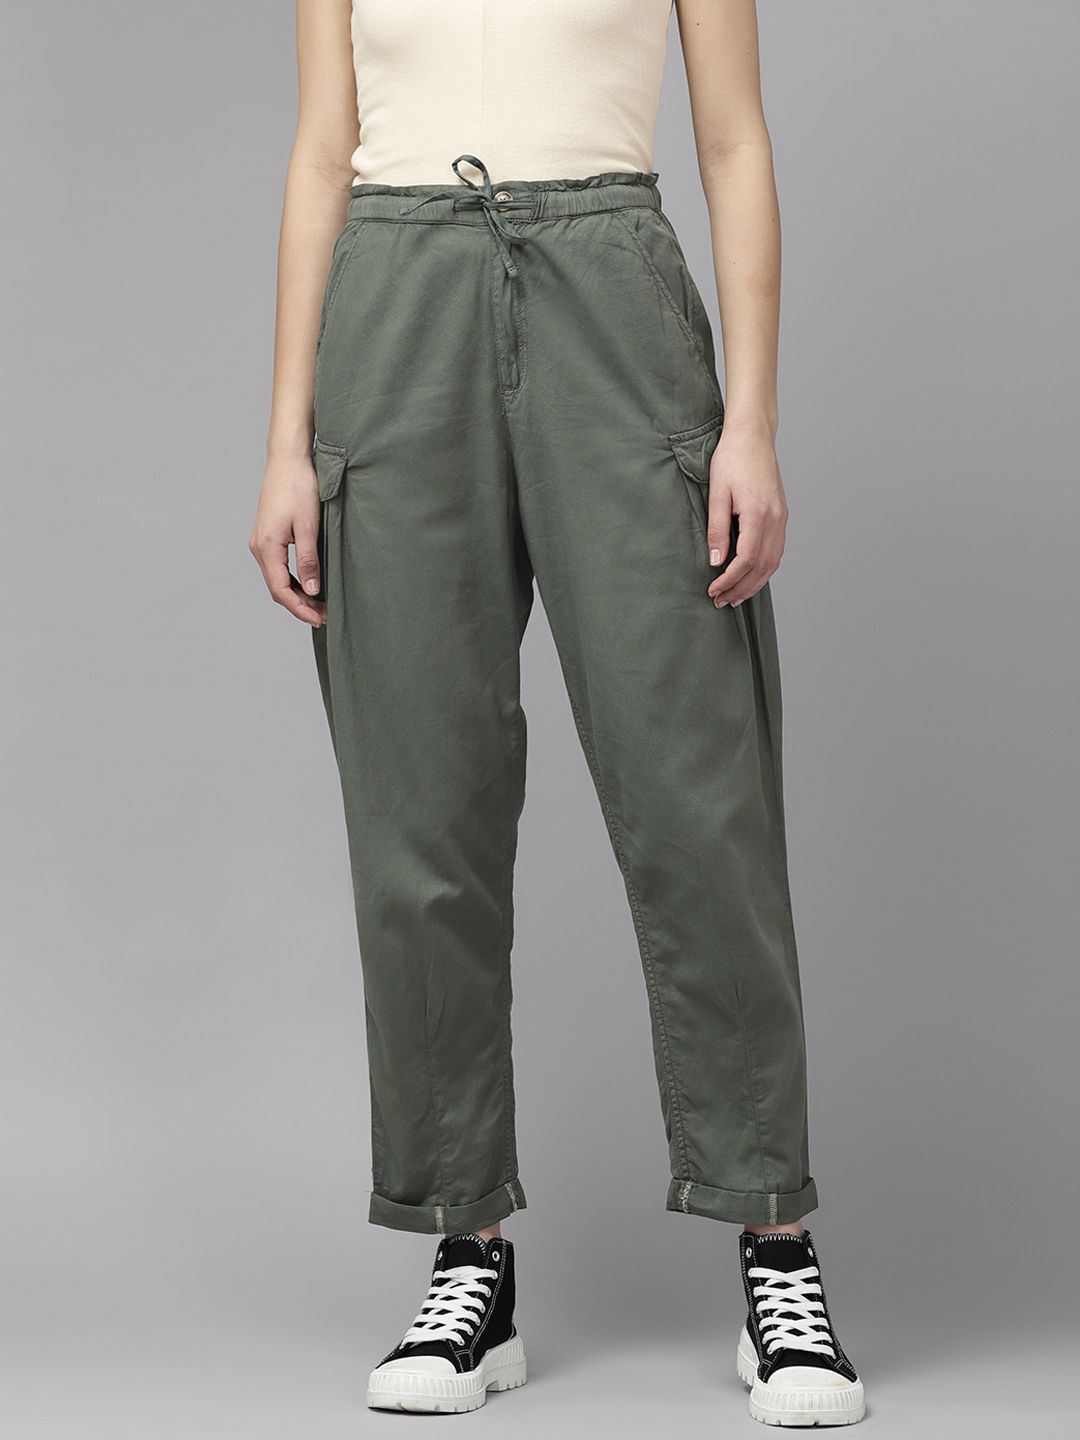 The Roadster Lifestyle Co. Women Pure Cotton Cargos Trousers Price in India